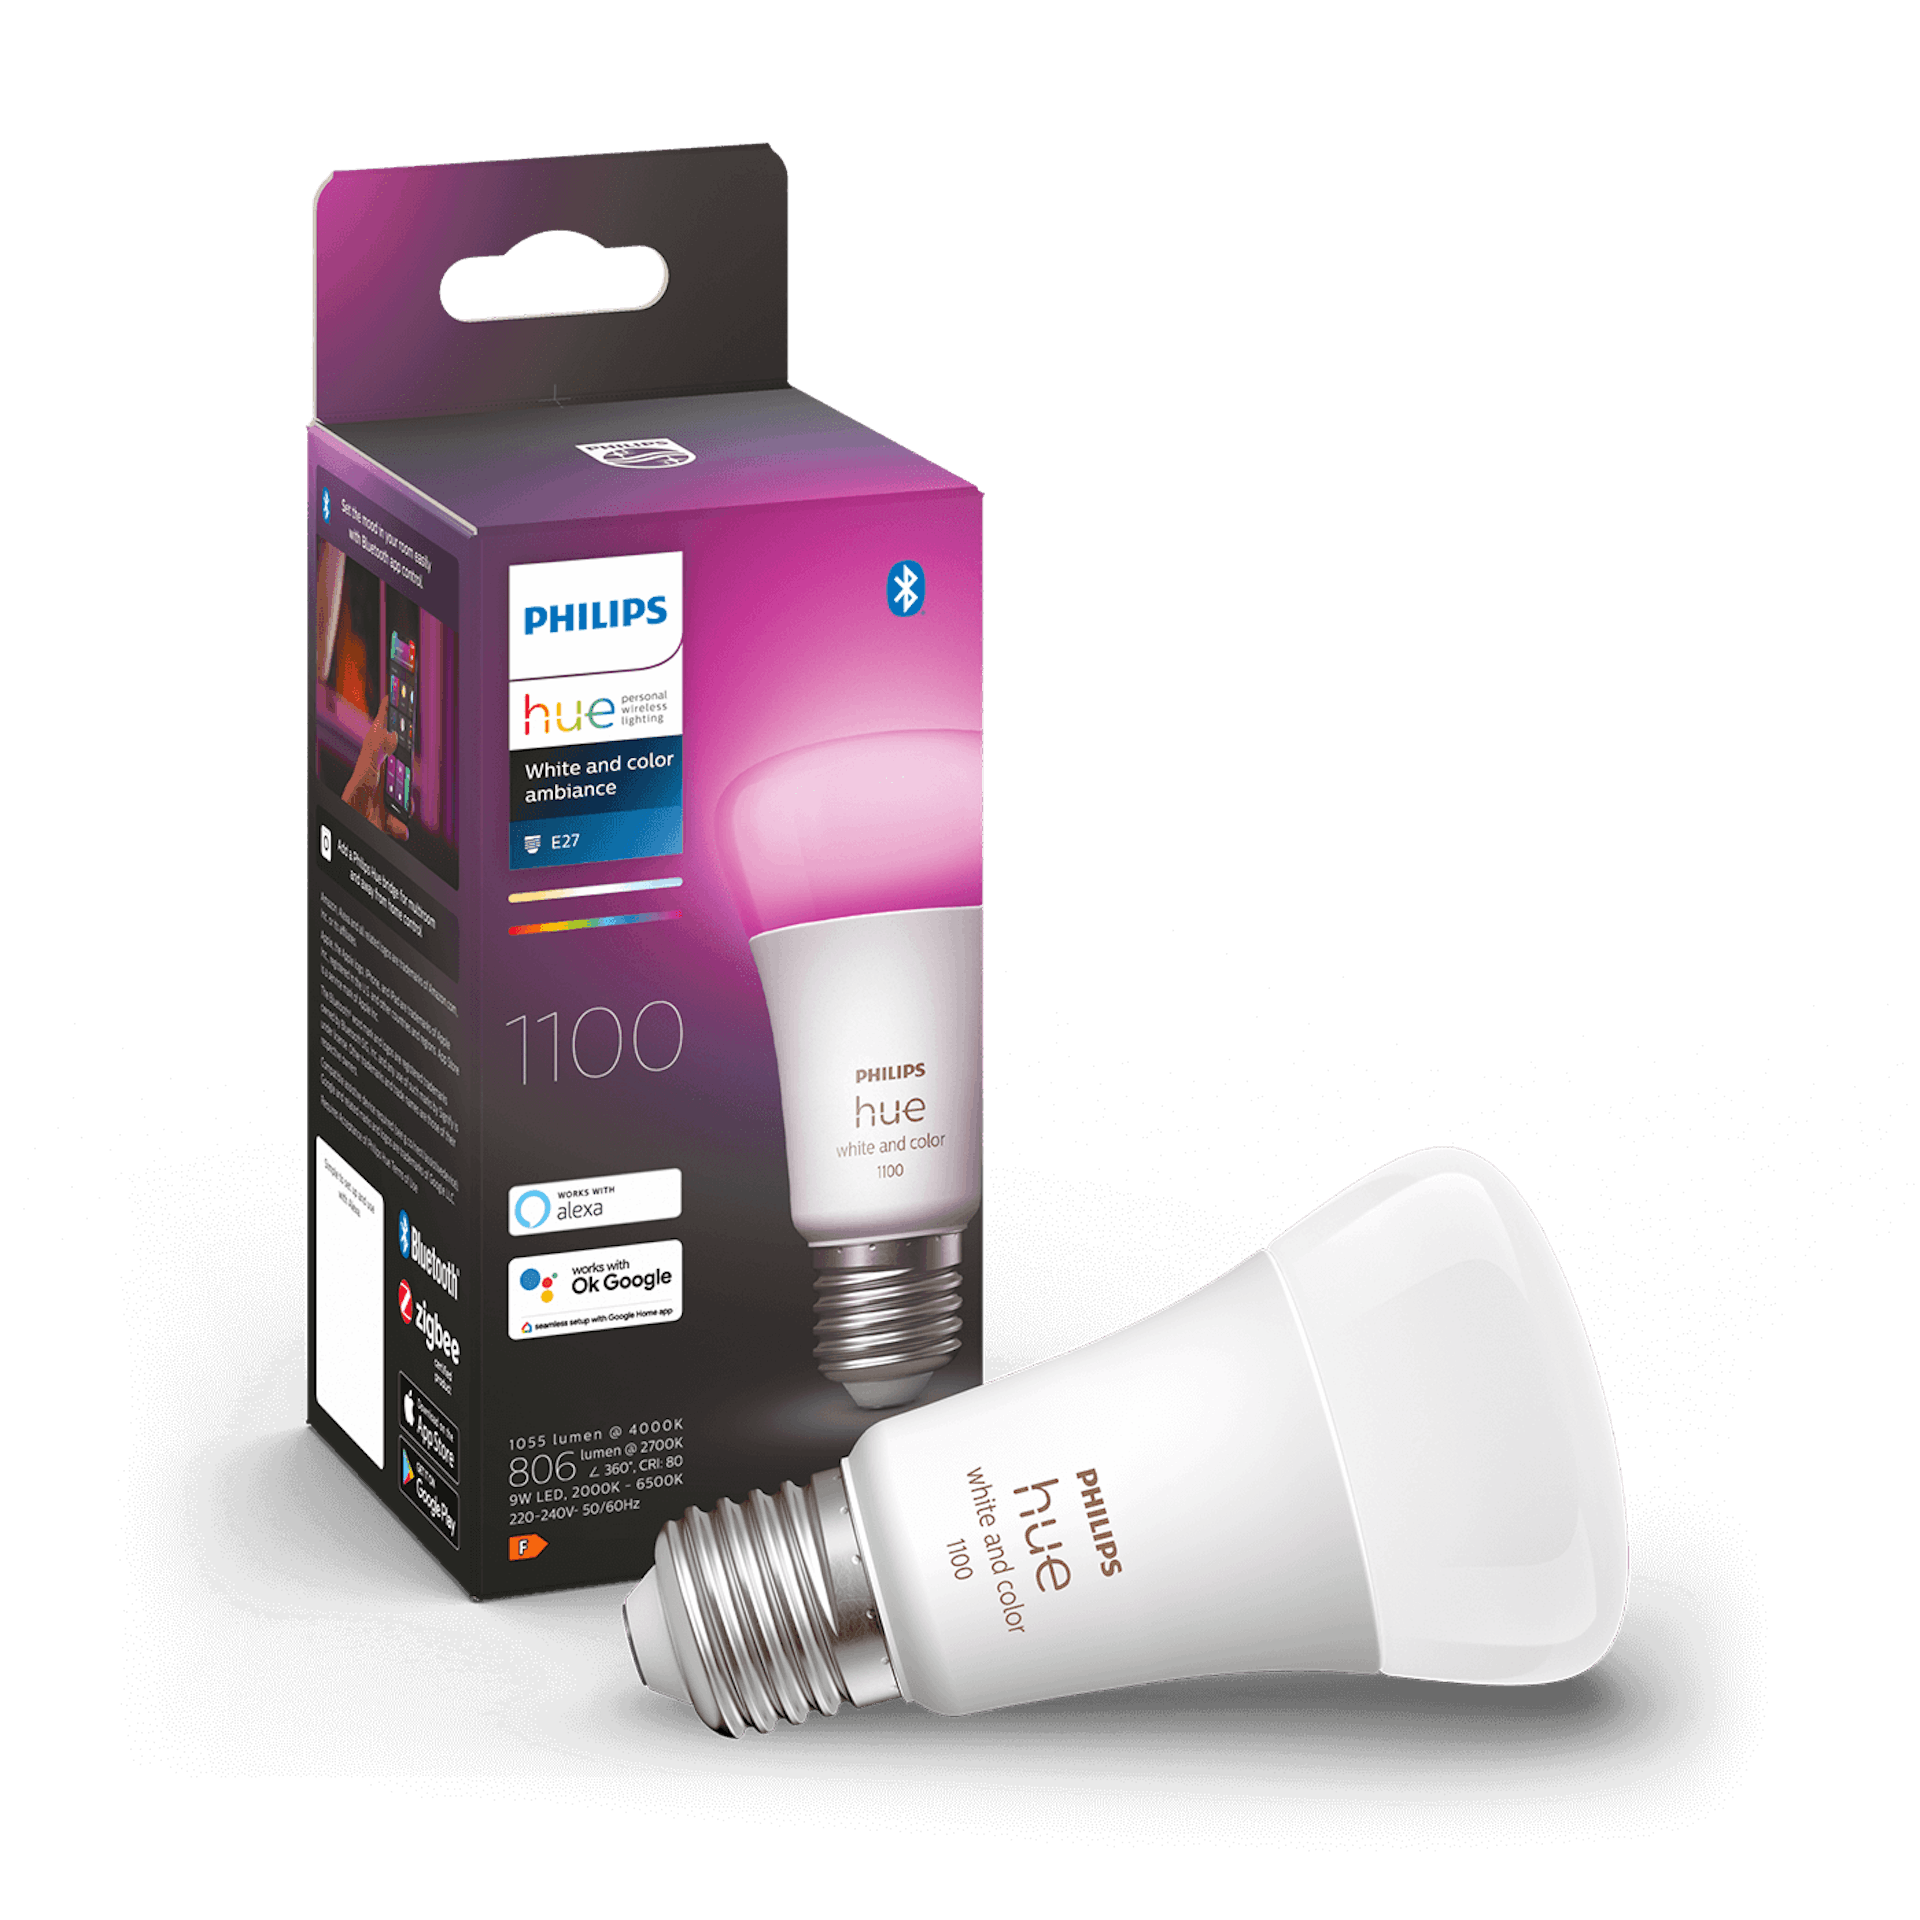 Philips Hue White/Color Ambiance E27 G2 - Details - Packaging image